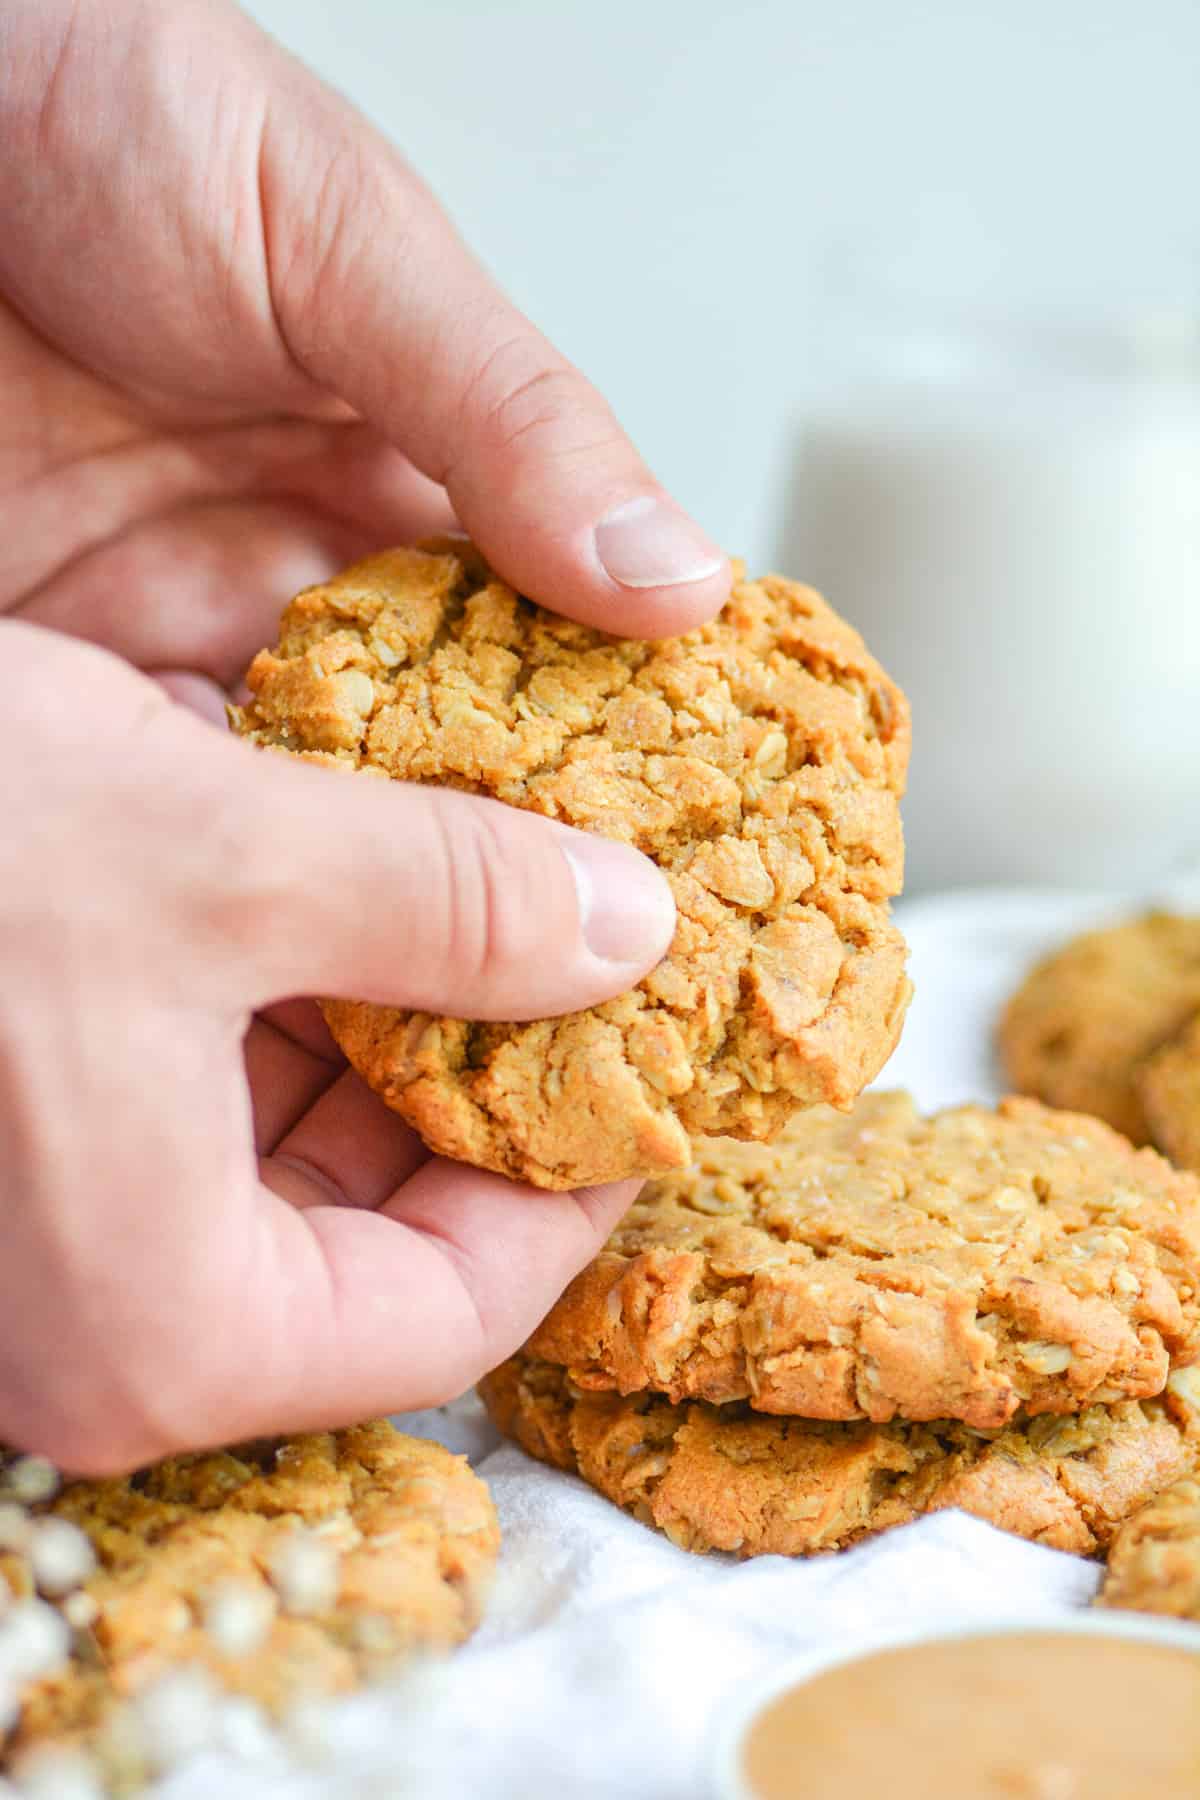 Hands holding a vegan oatmeal peanut butter cookie with more cookies in the foreground.